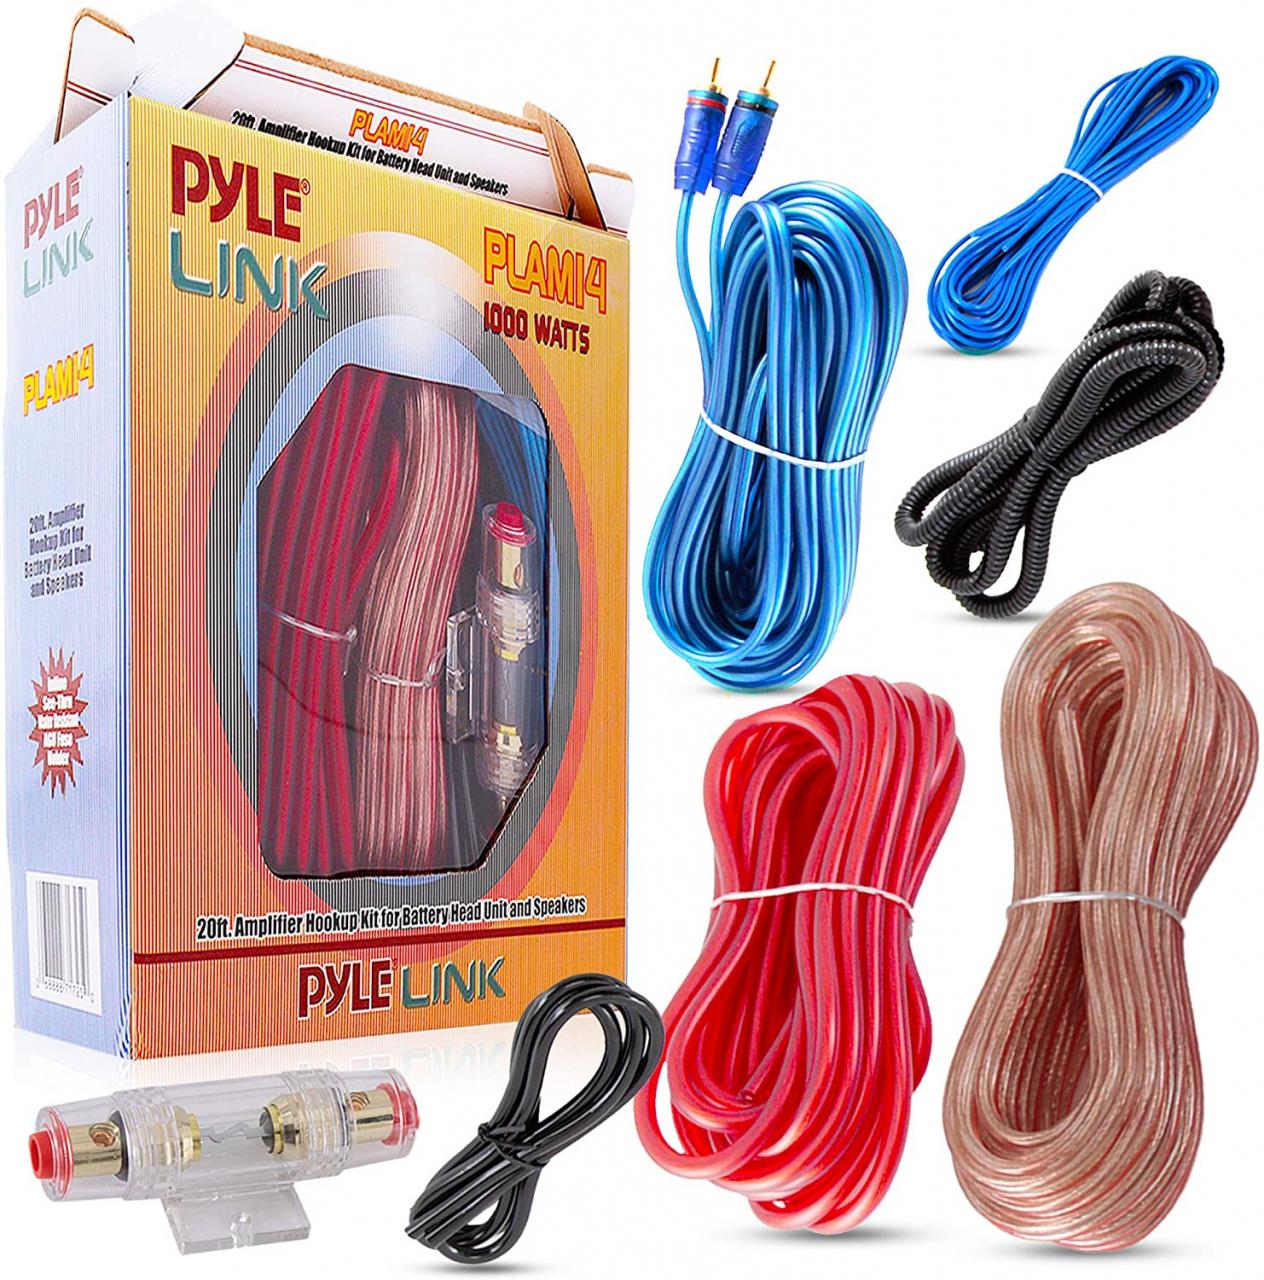 Buy Car Audio Cable Wiring Kit - 20ft 8 Gauge Powered 1200 Watt Complete  Amplifier Hookup for Battery, Head Unit & Stereo Speaker Installation Sound  System - Pyle PLAM14 Online in Turkey. B00022OBD8